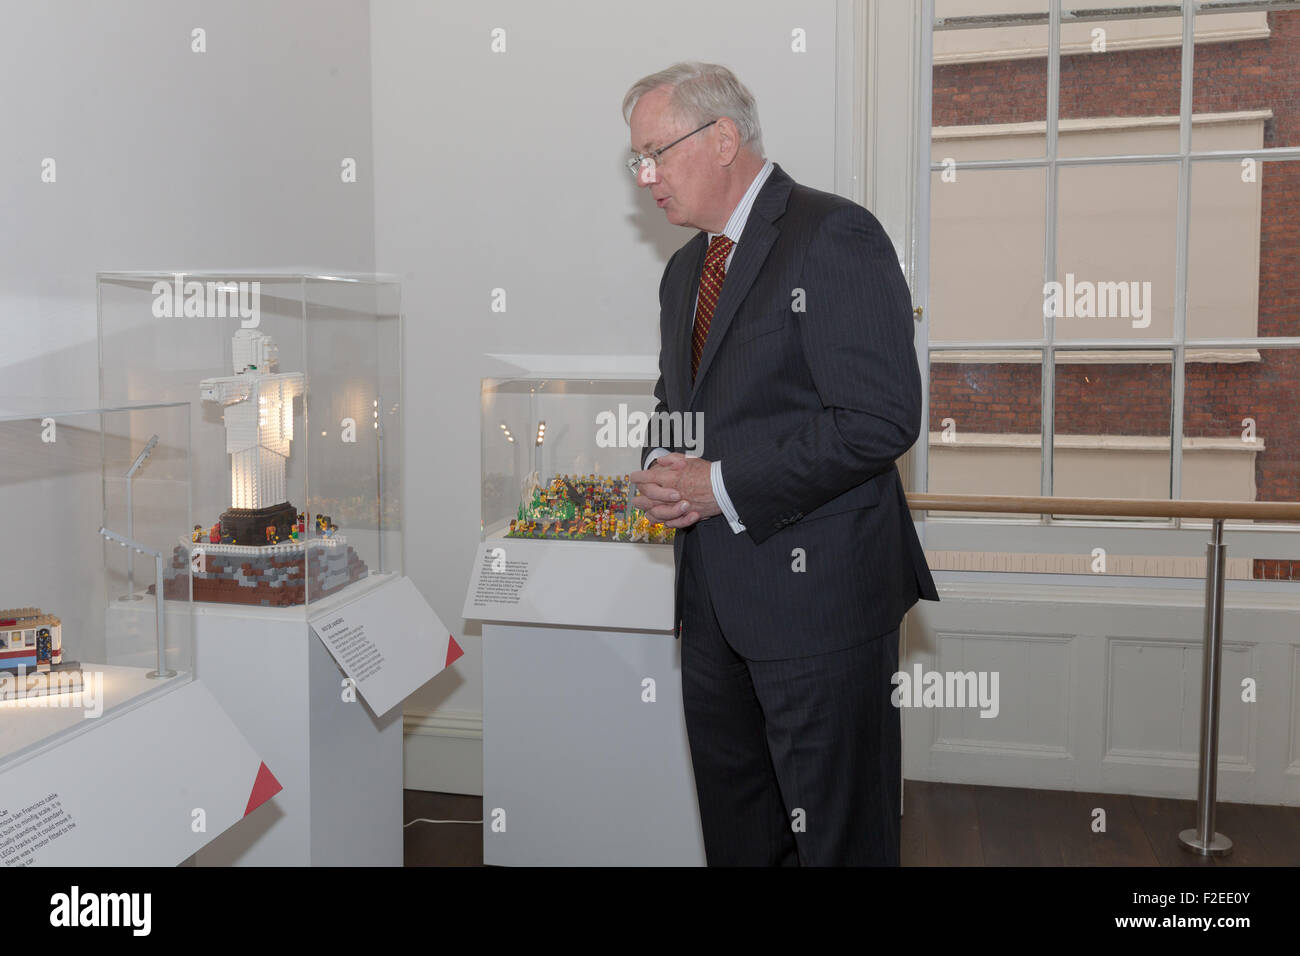 Shrewsbury, Shropshire, UK. 17th September, 2015. The Duke of Gloucester admires a Lego exhibit during the opening ceremony of the town's new Museum and Art Gallery. Credit:  Michael Buddle/Alamy Live News Stock Photo